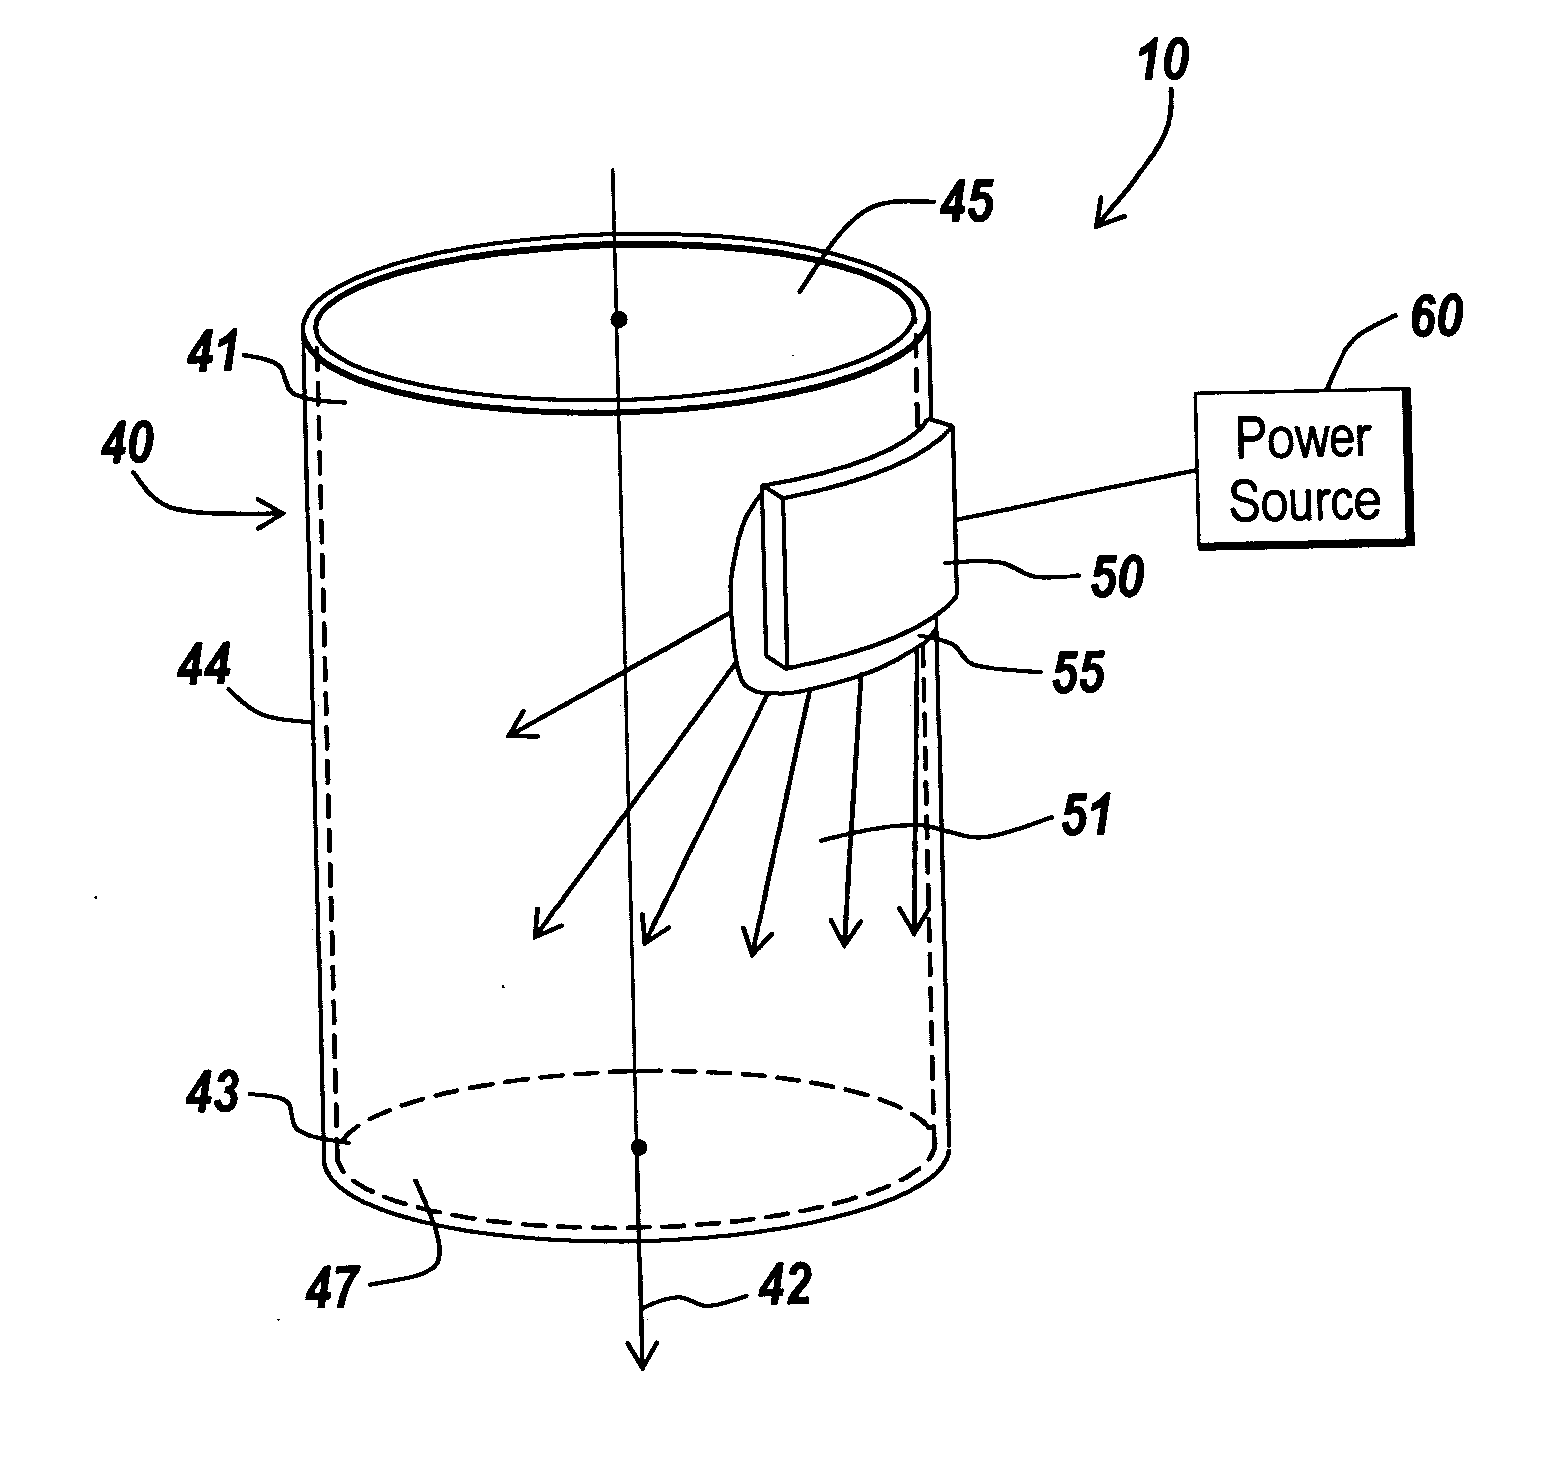 Integrated access device and light source for surgical procedures